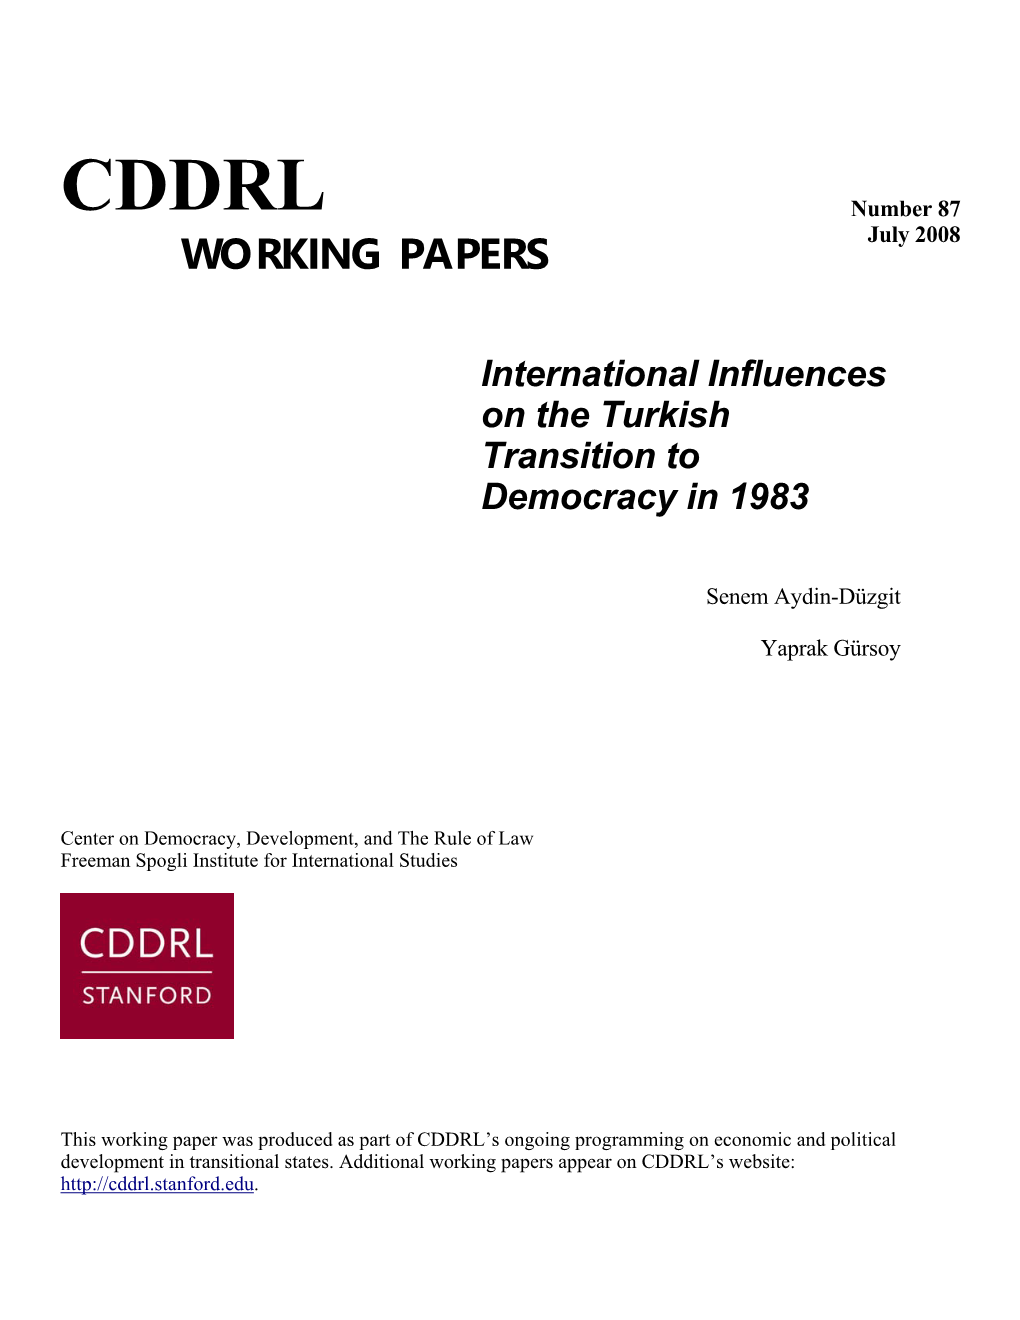 CDDRL Number 87 WORKING PAPERS July 2008